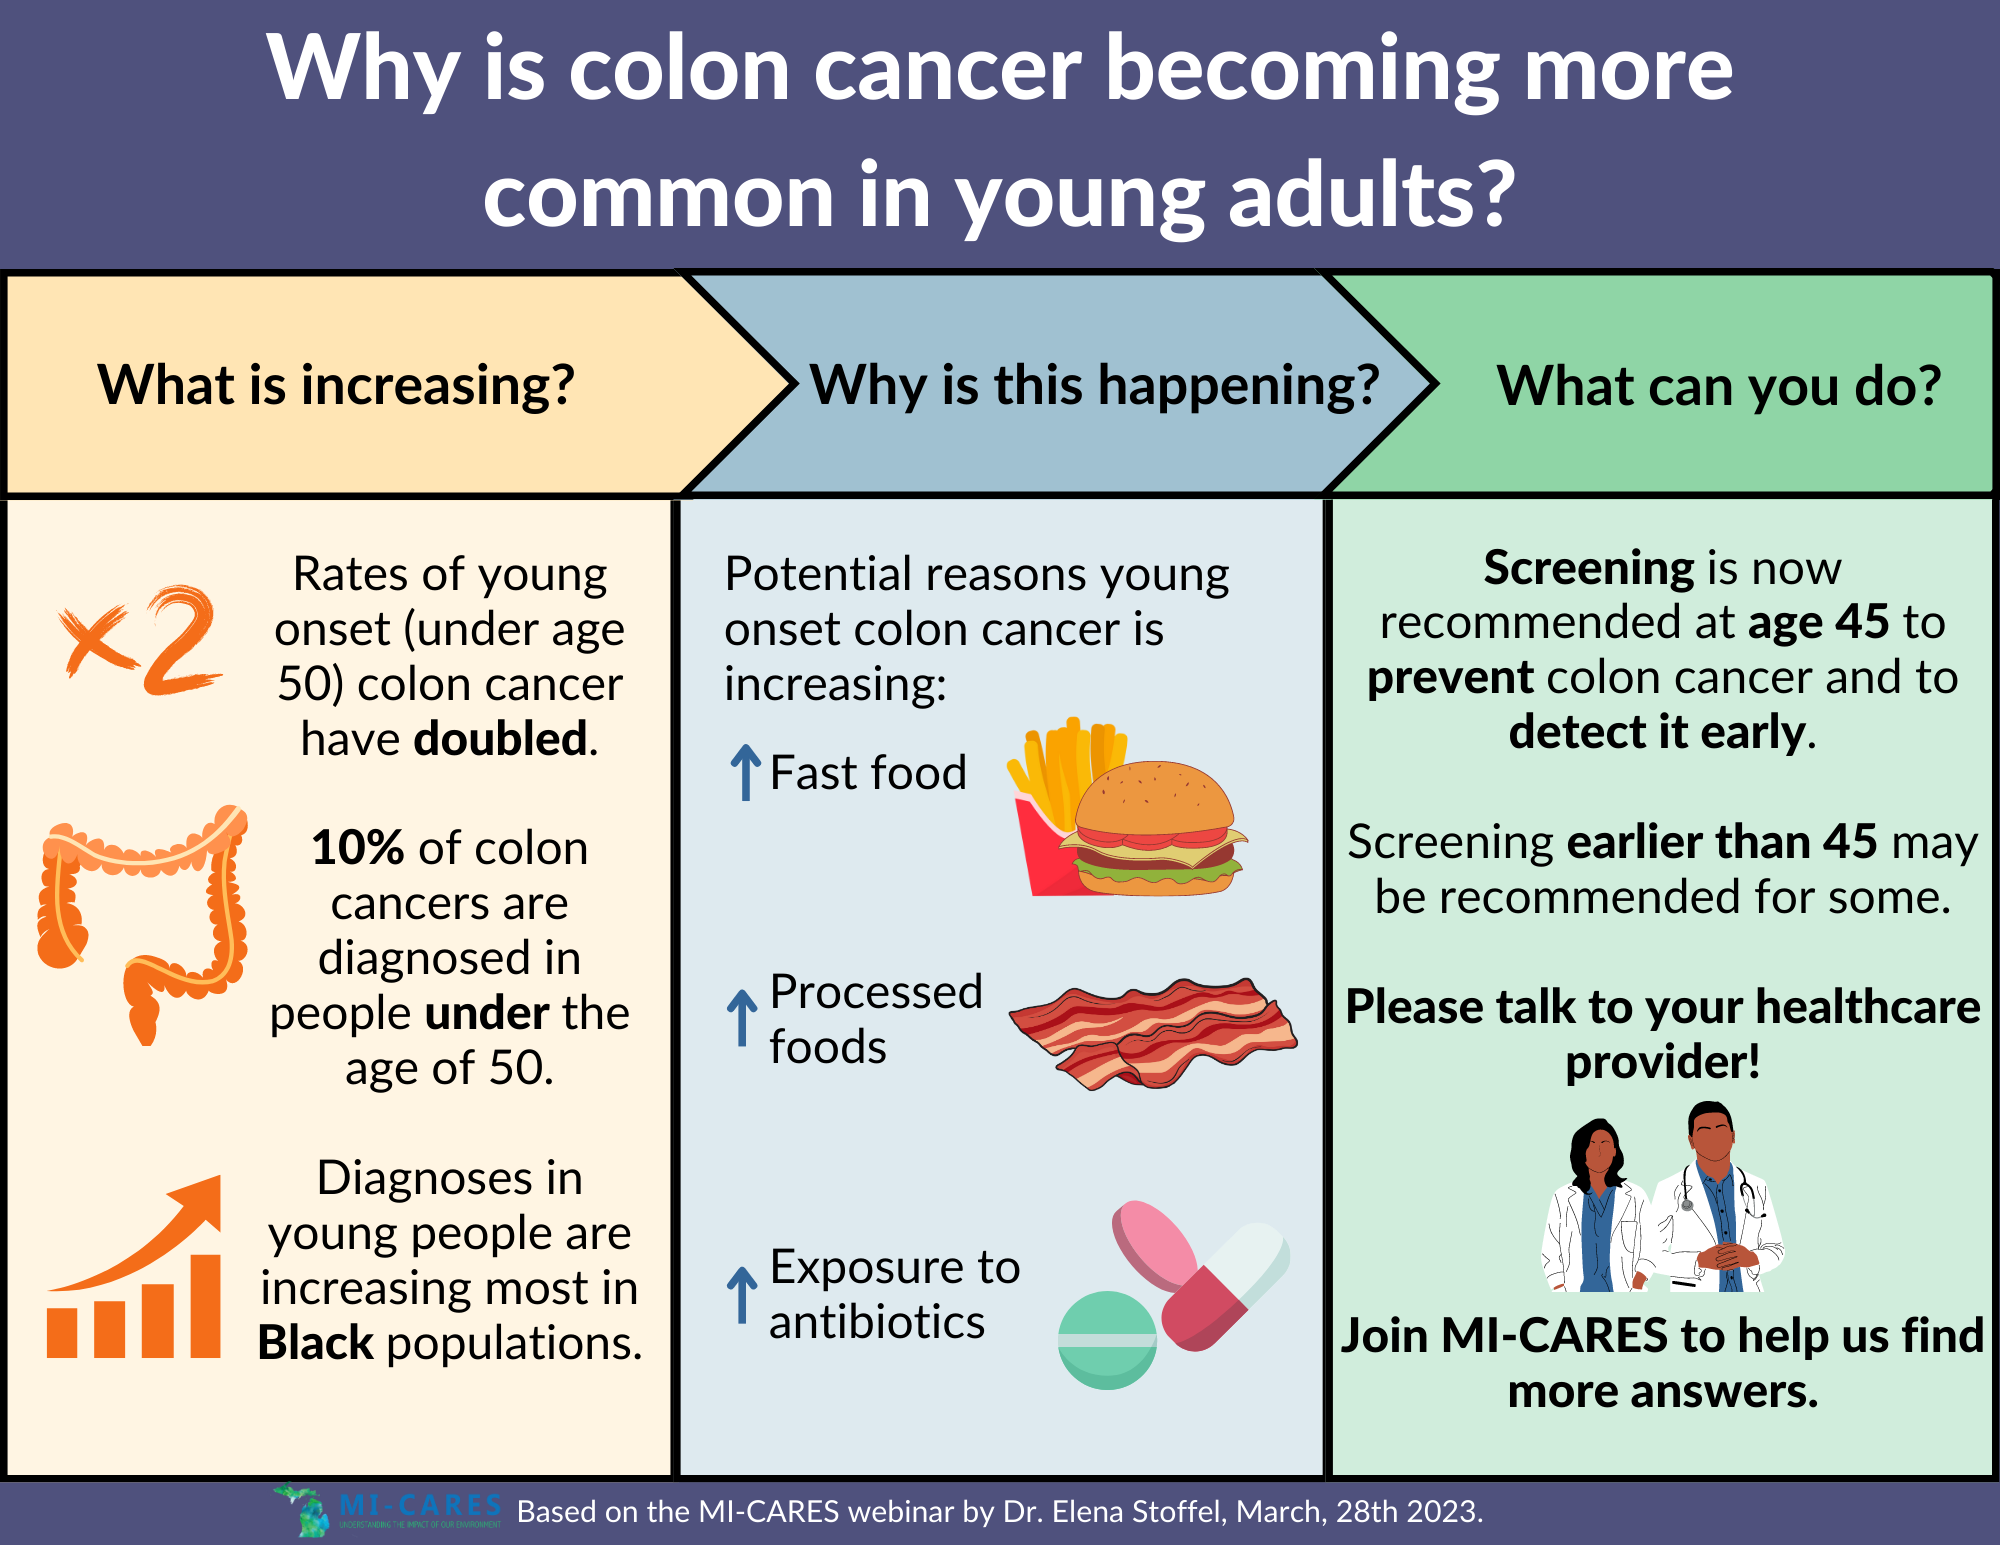 Colon cancer is increasing in young adults teaser image